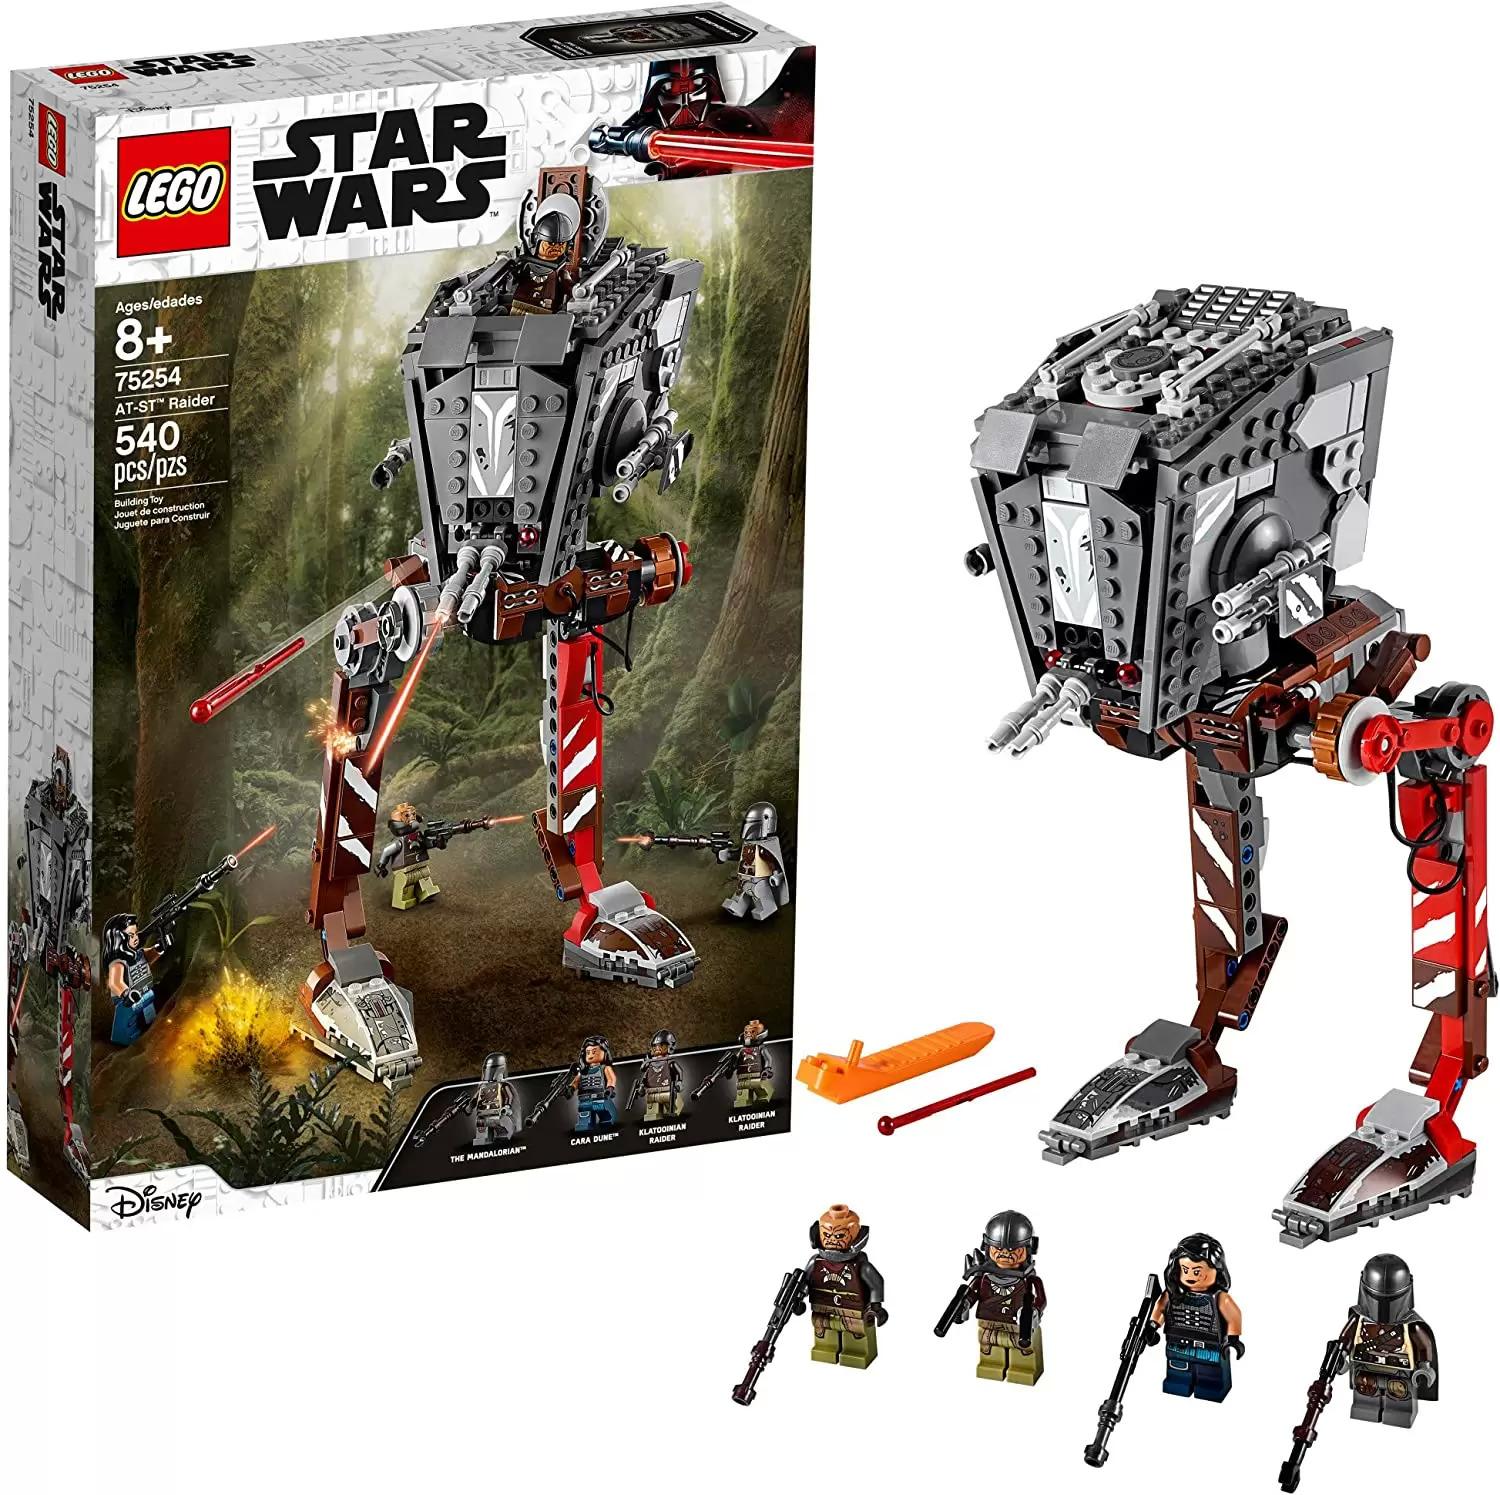 LEGO Star Wars AT-ST Raider 75254 for $28.62 Shipped